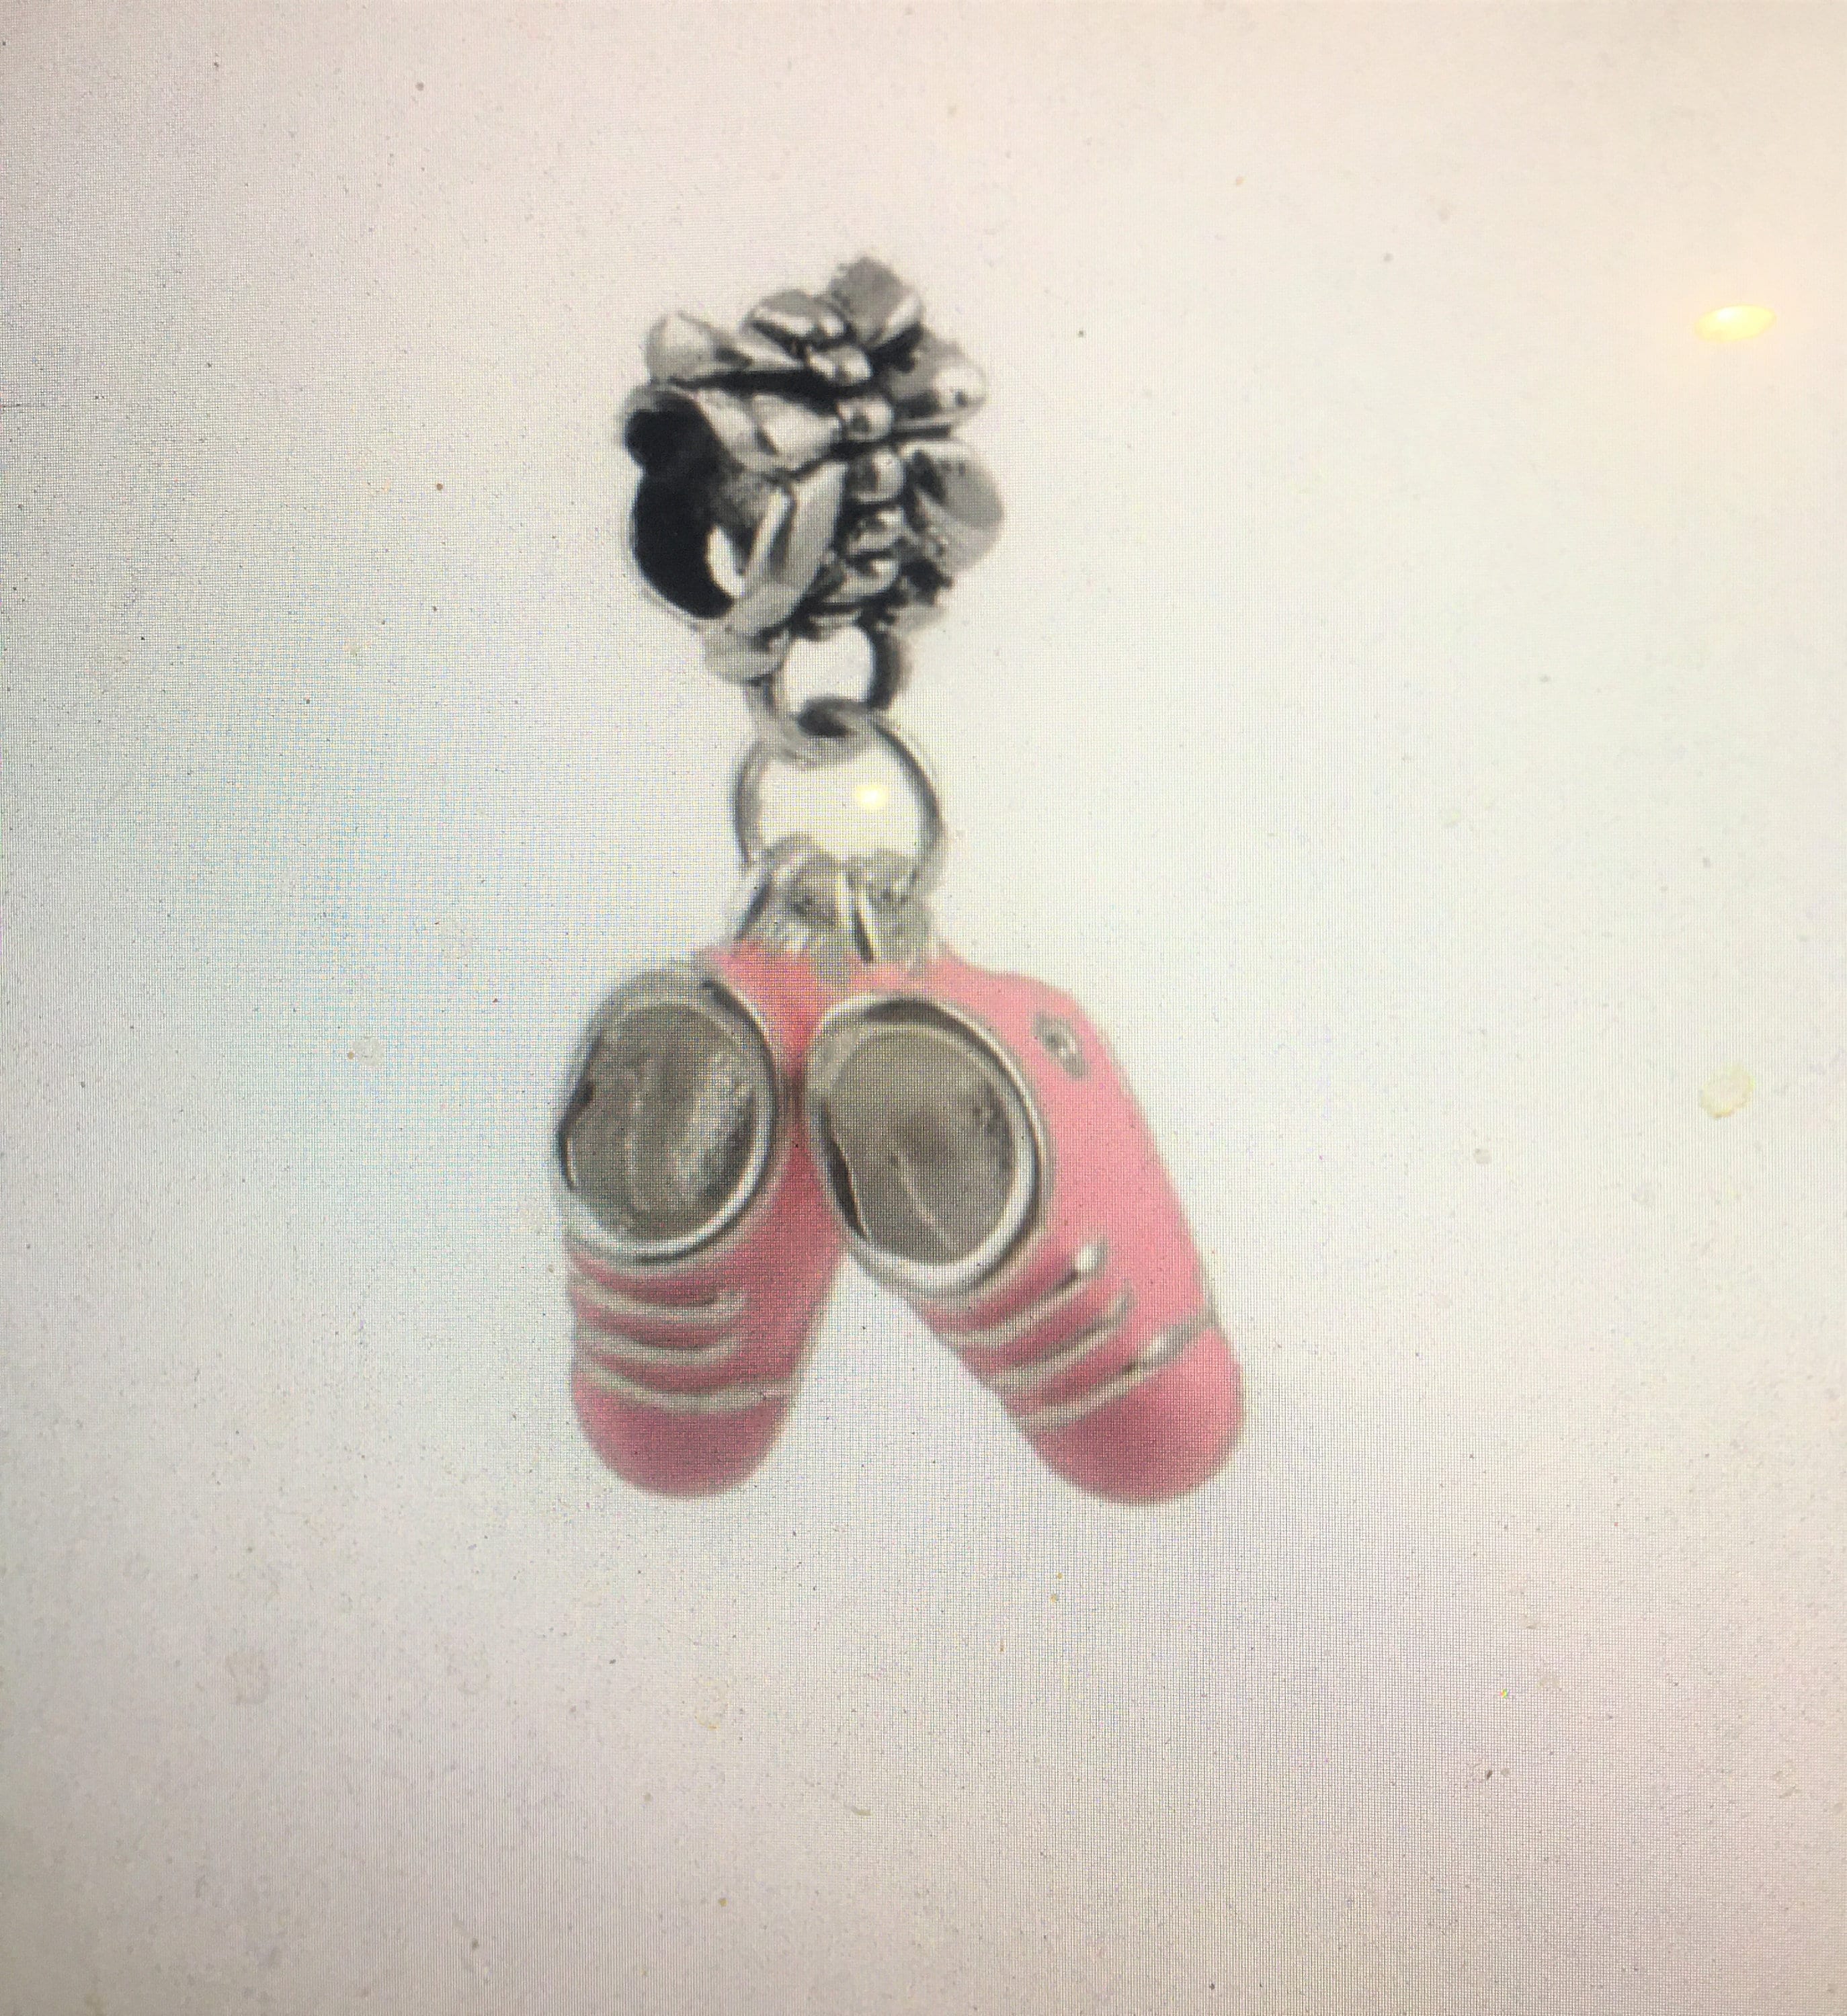 Pandora Style Baby Shoe Dangle Charm Baby Girl Pair of Shoes | Etsy